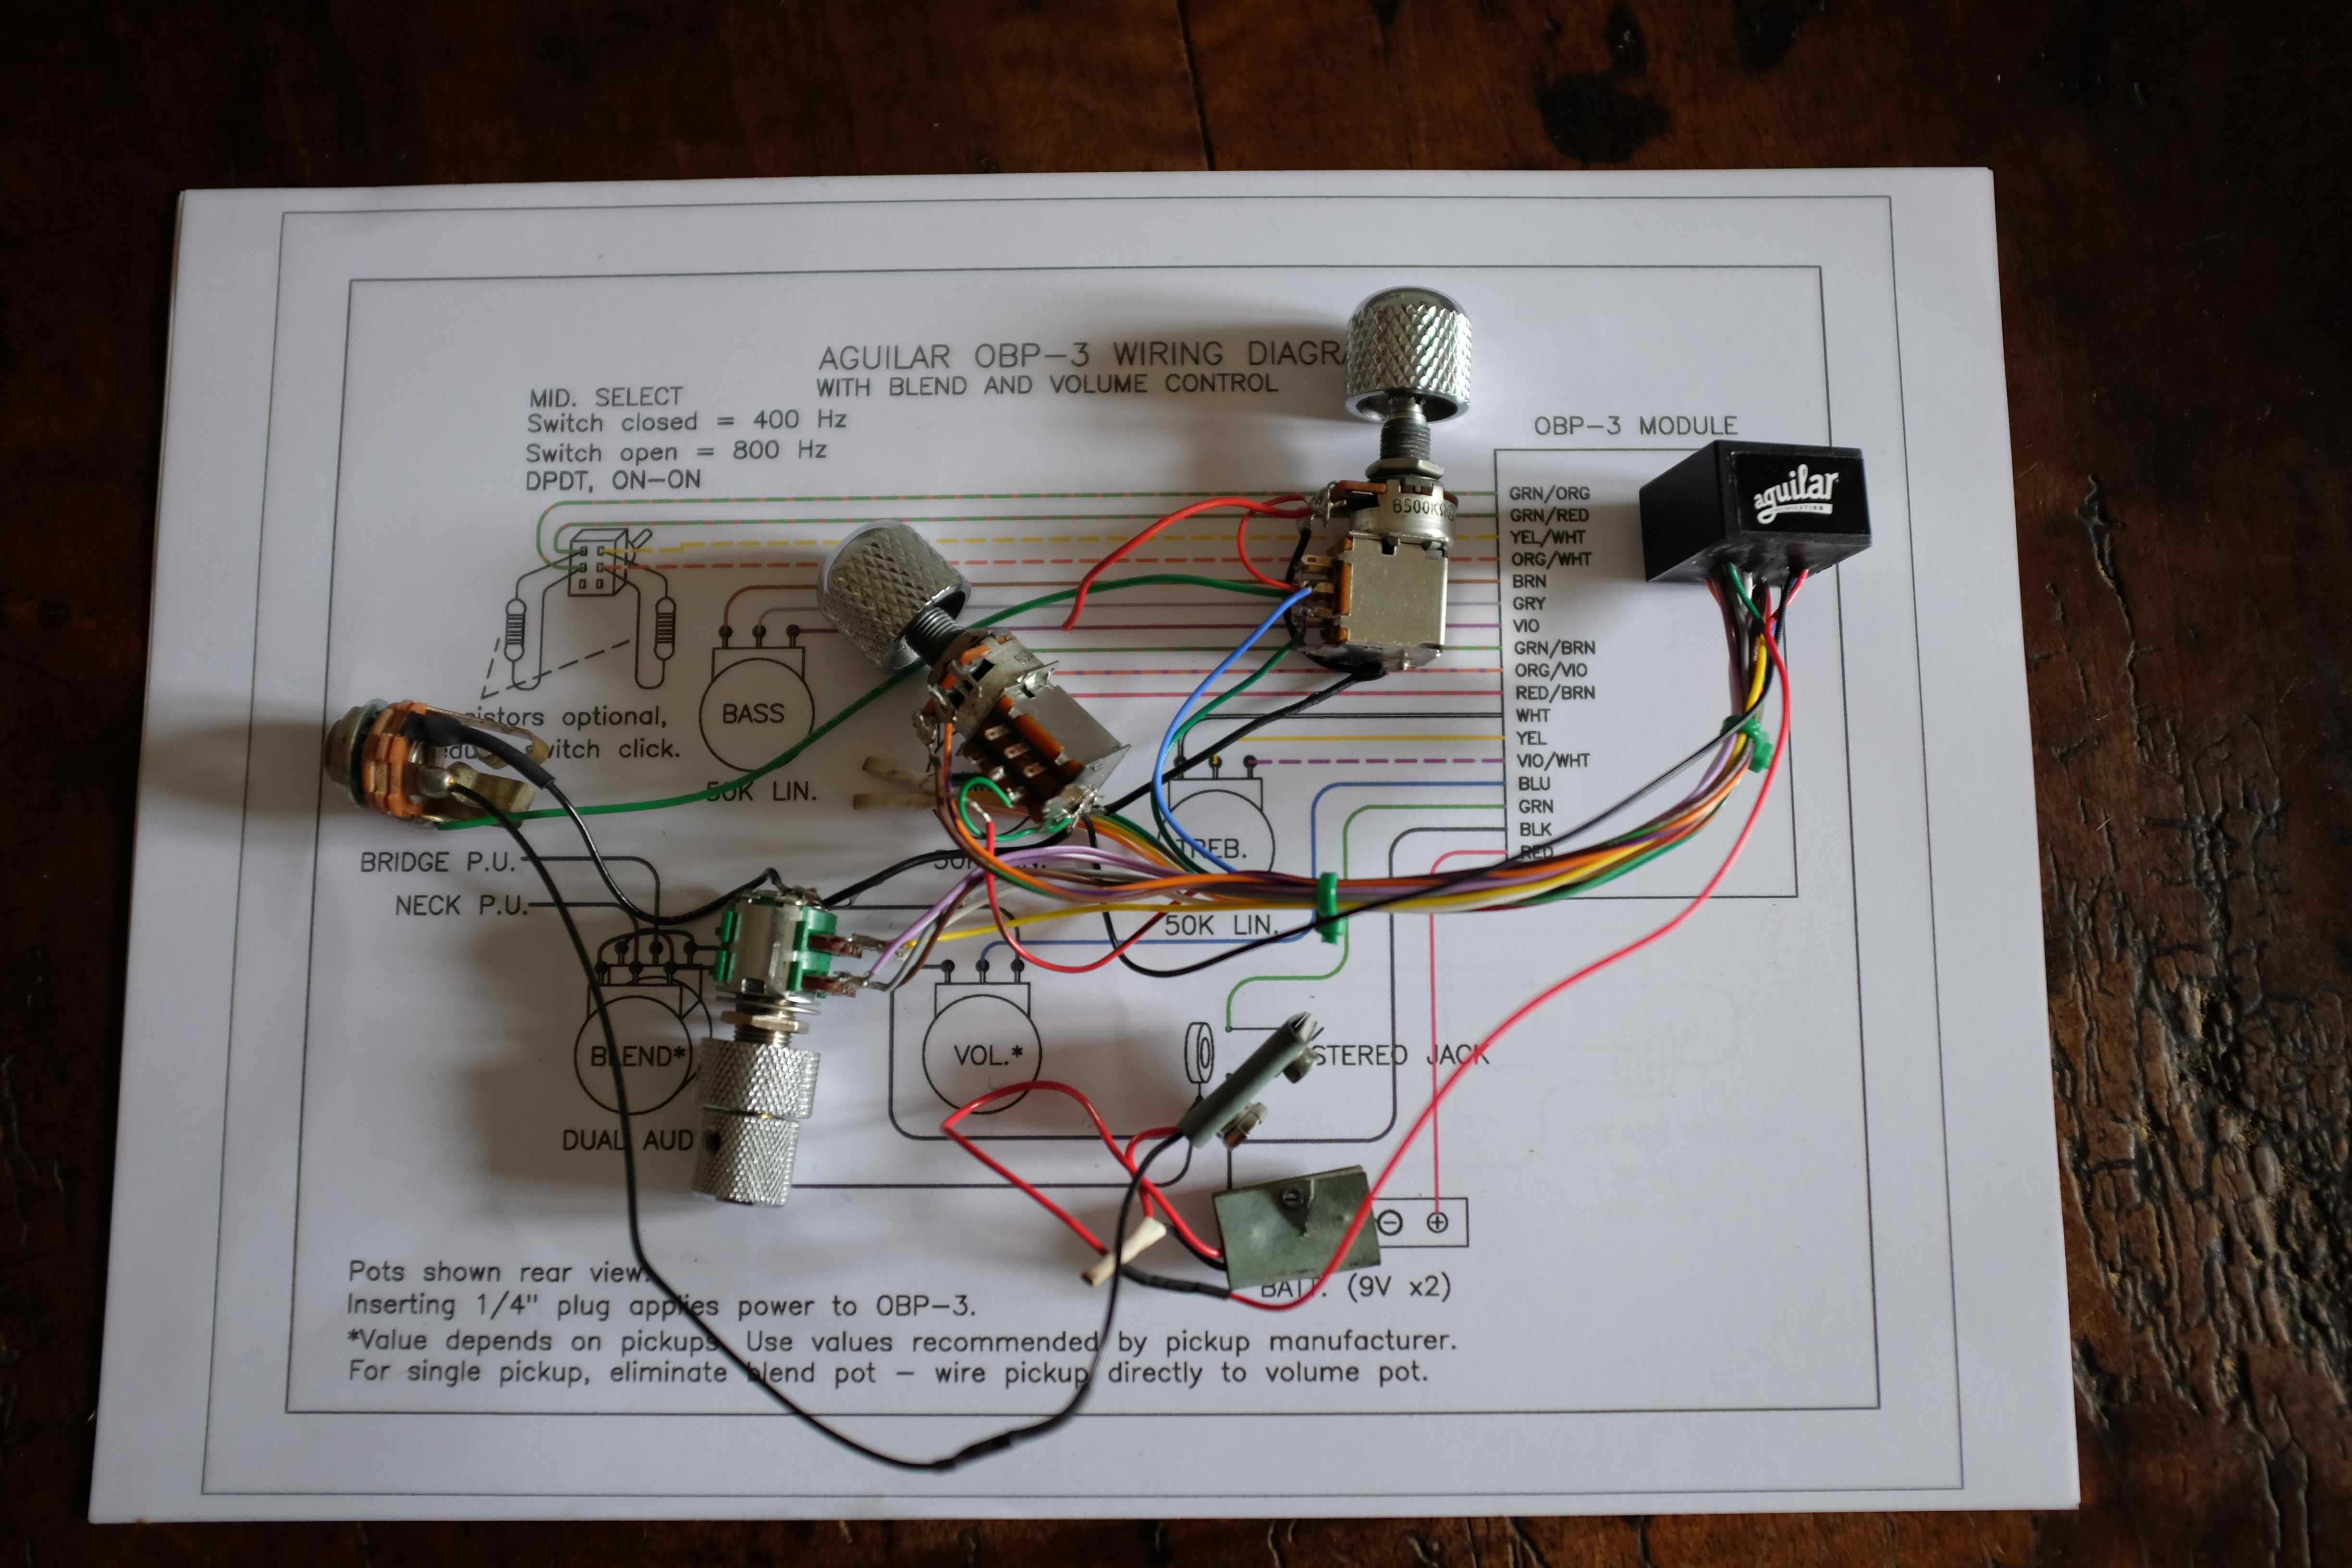 aguilar obp 3 preamp wiring diagram